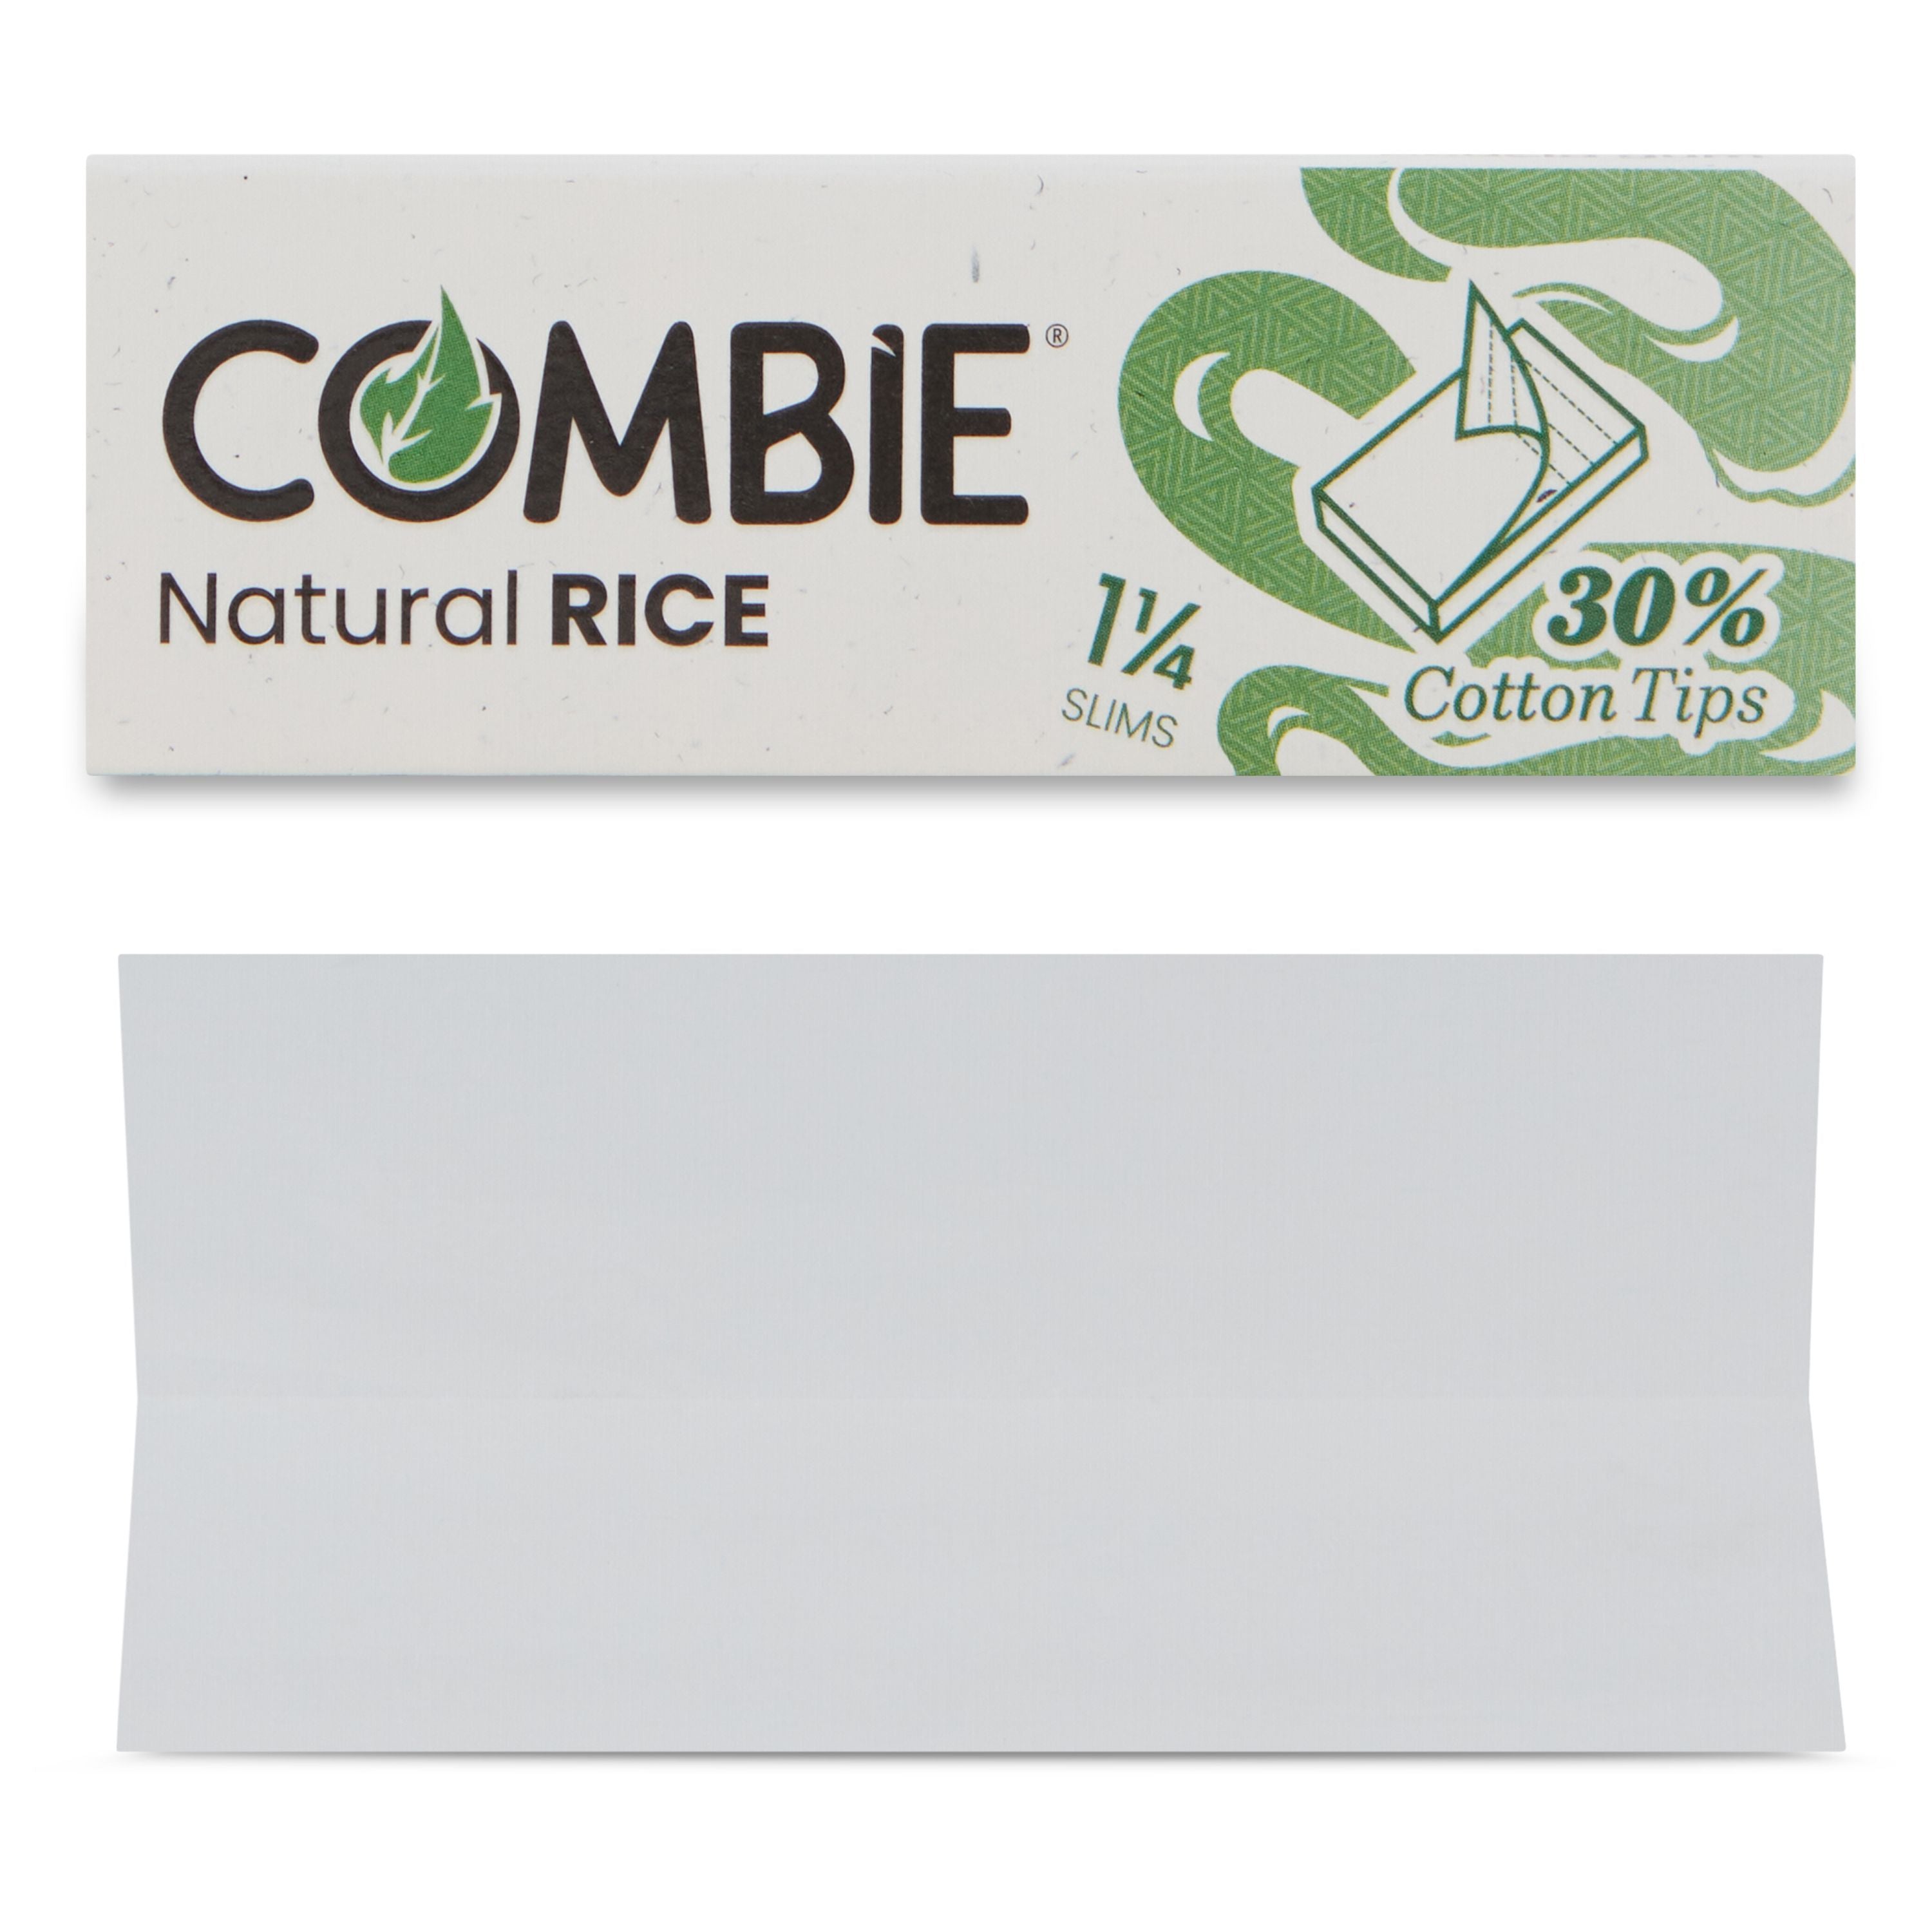 1-1/4 NATURAL RICE ROLLING PAPERS - 22 packs